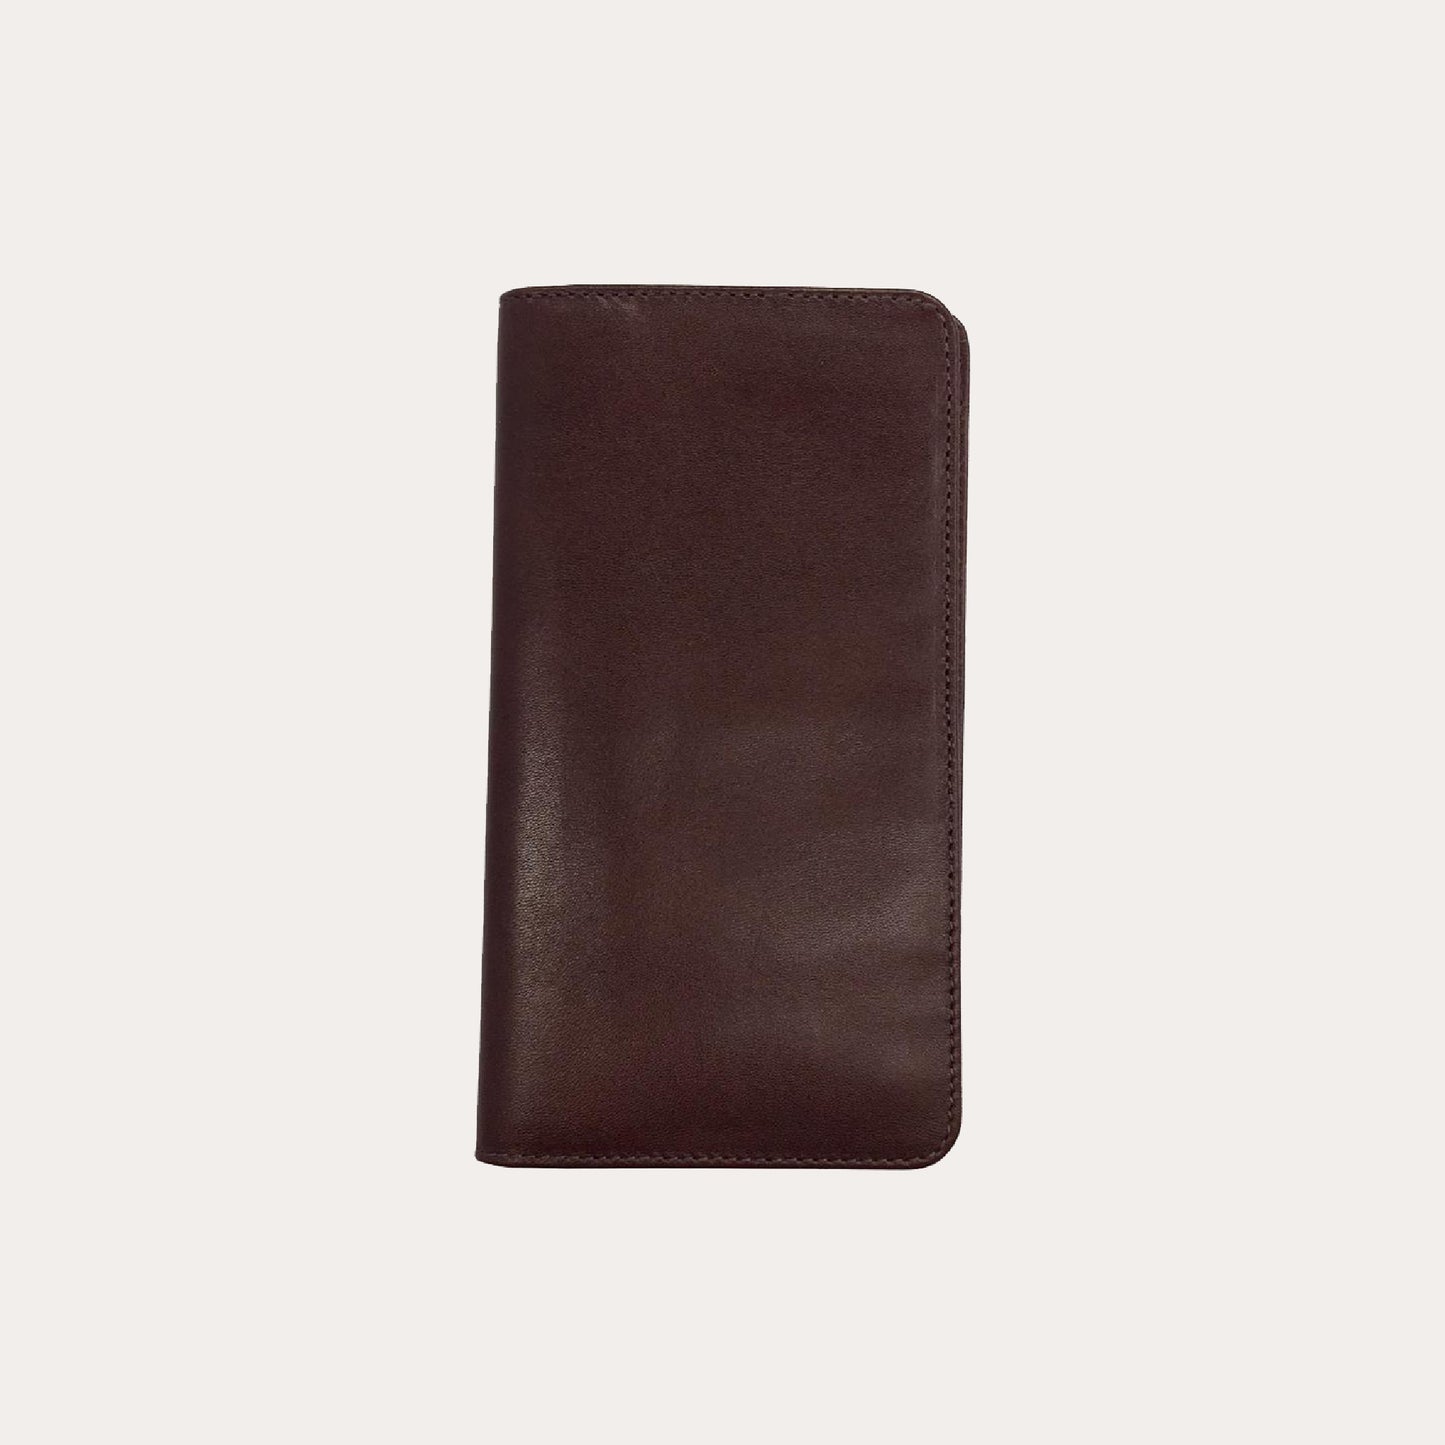 Long Maroon Leather Wallet-5 Credit Card Sections